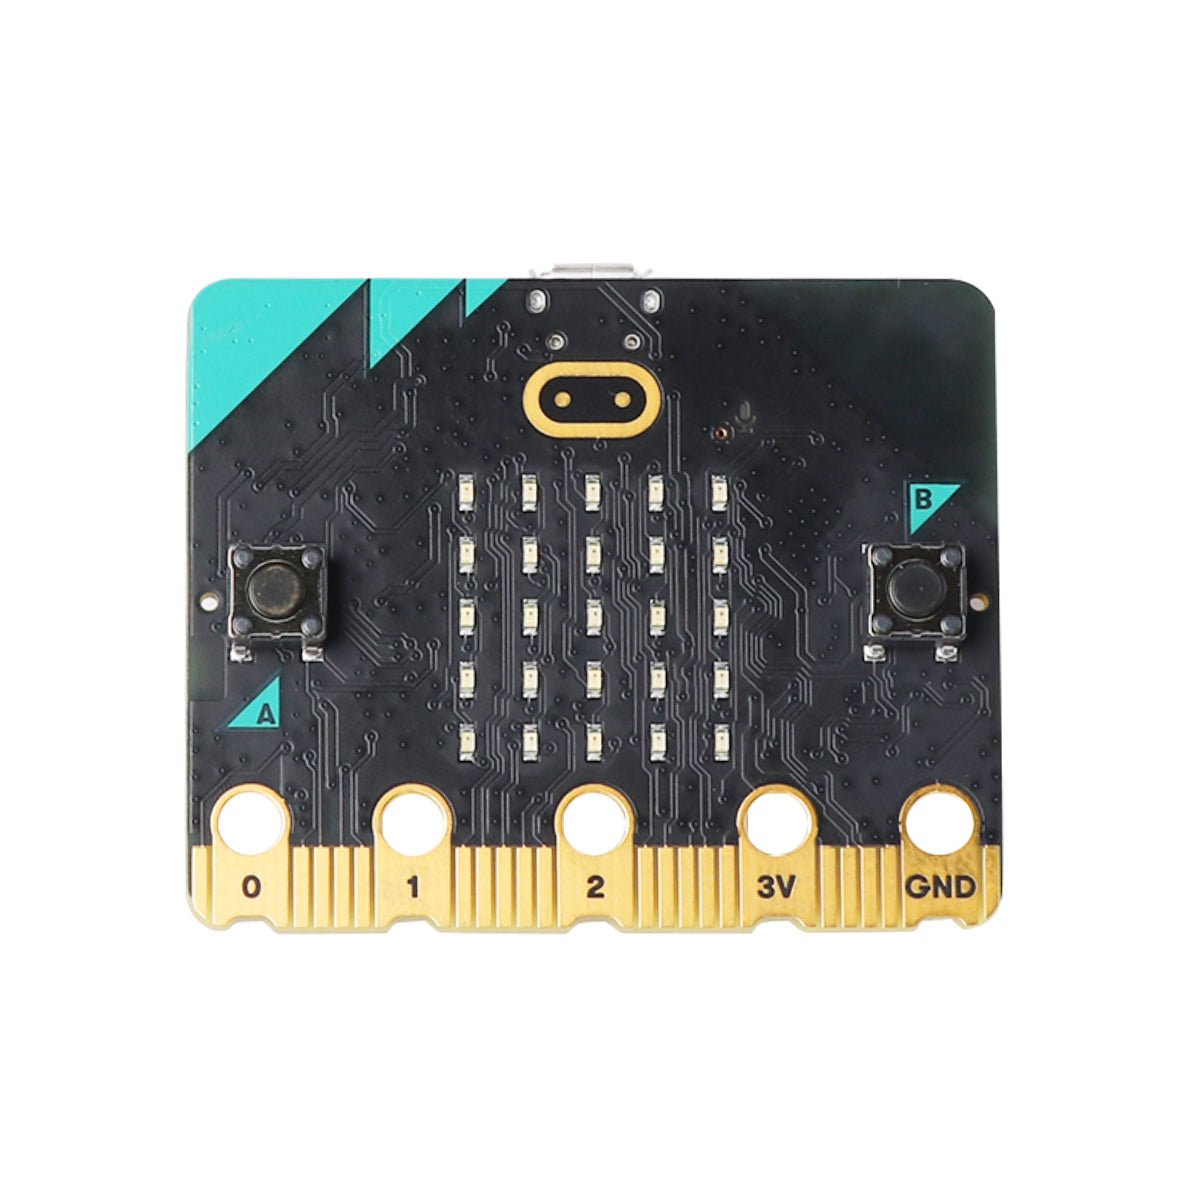 What is the BBC microbit and how can I use it? 